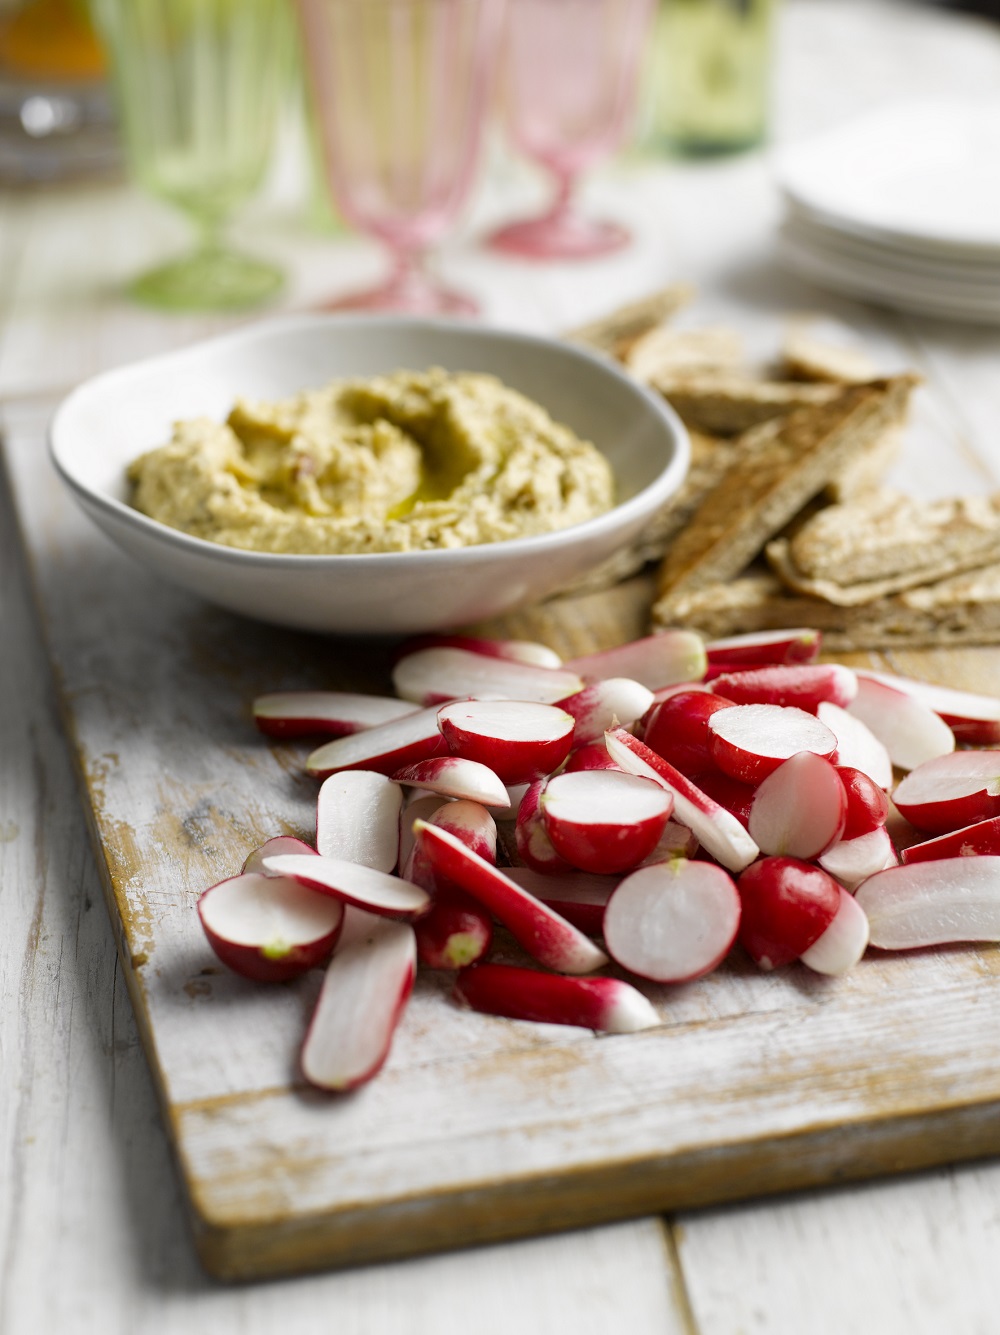 How To Make Toasted Garlic Hummus With Radishes